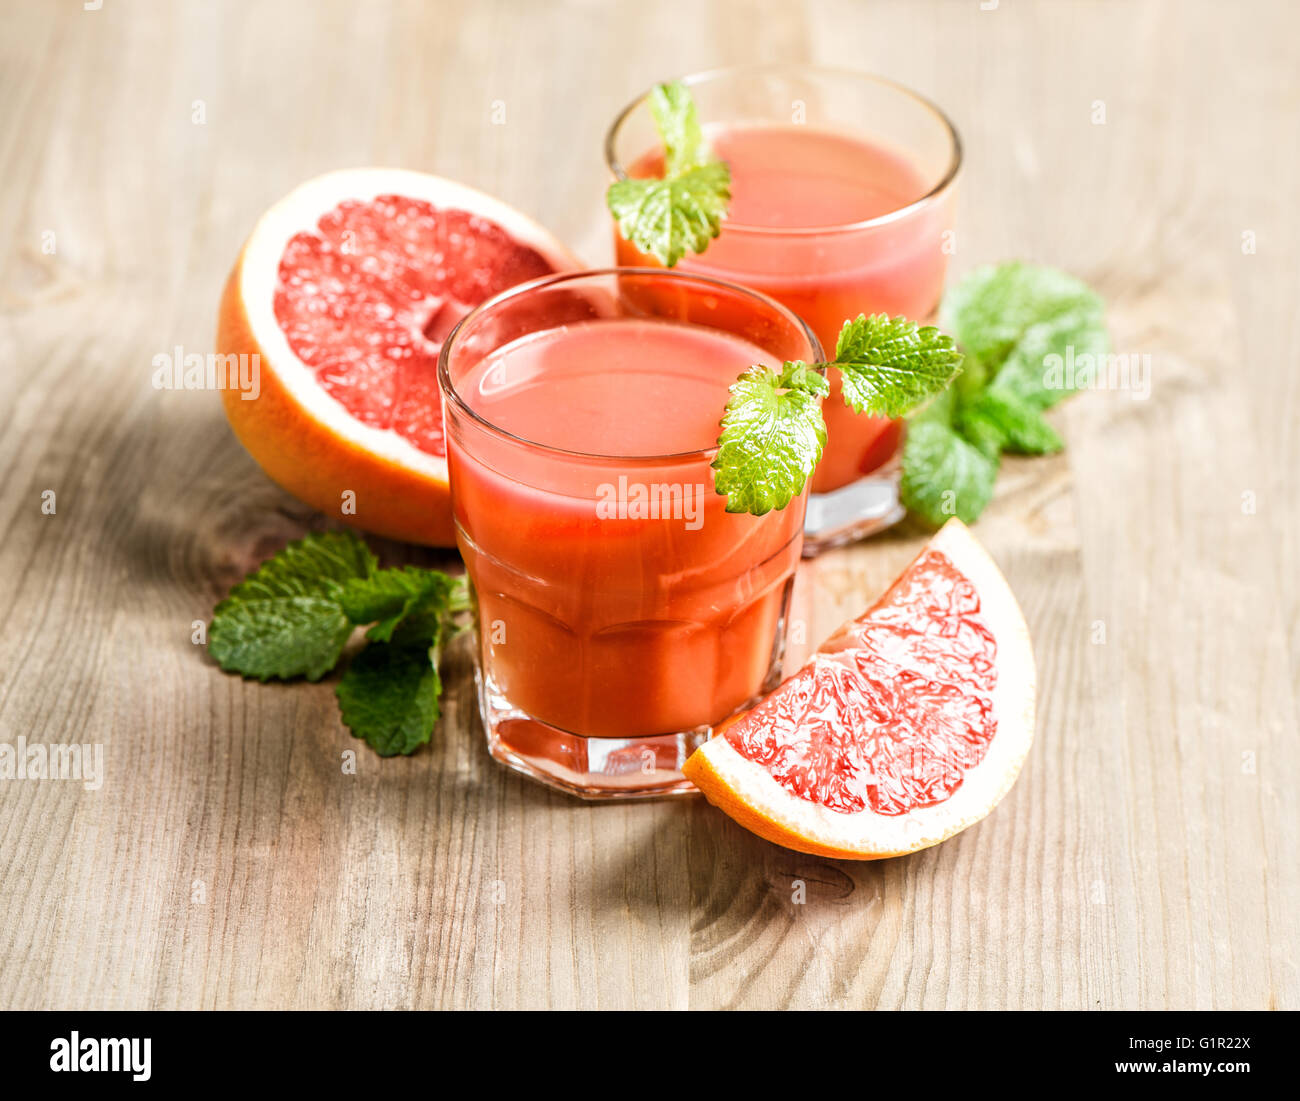 Orange grapefruit juice with fresh fruits and mint leaves. Healthy food and drinks Stock Photo